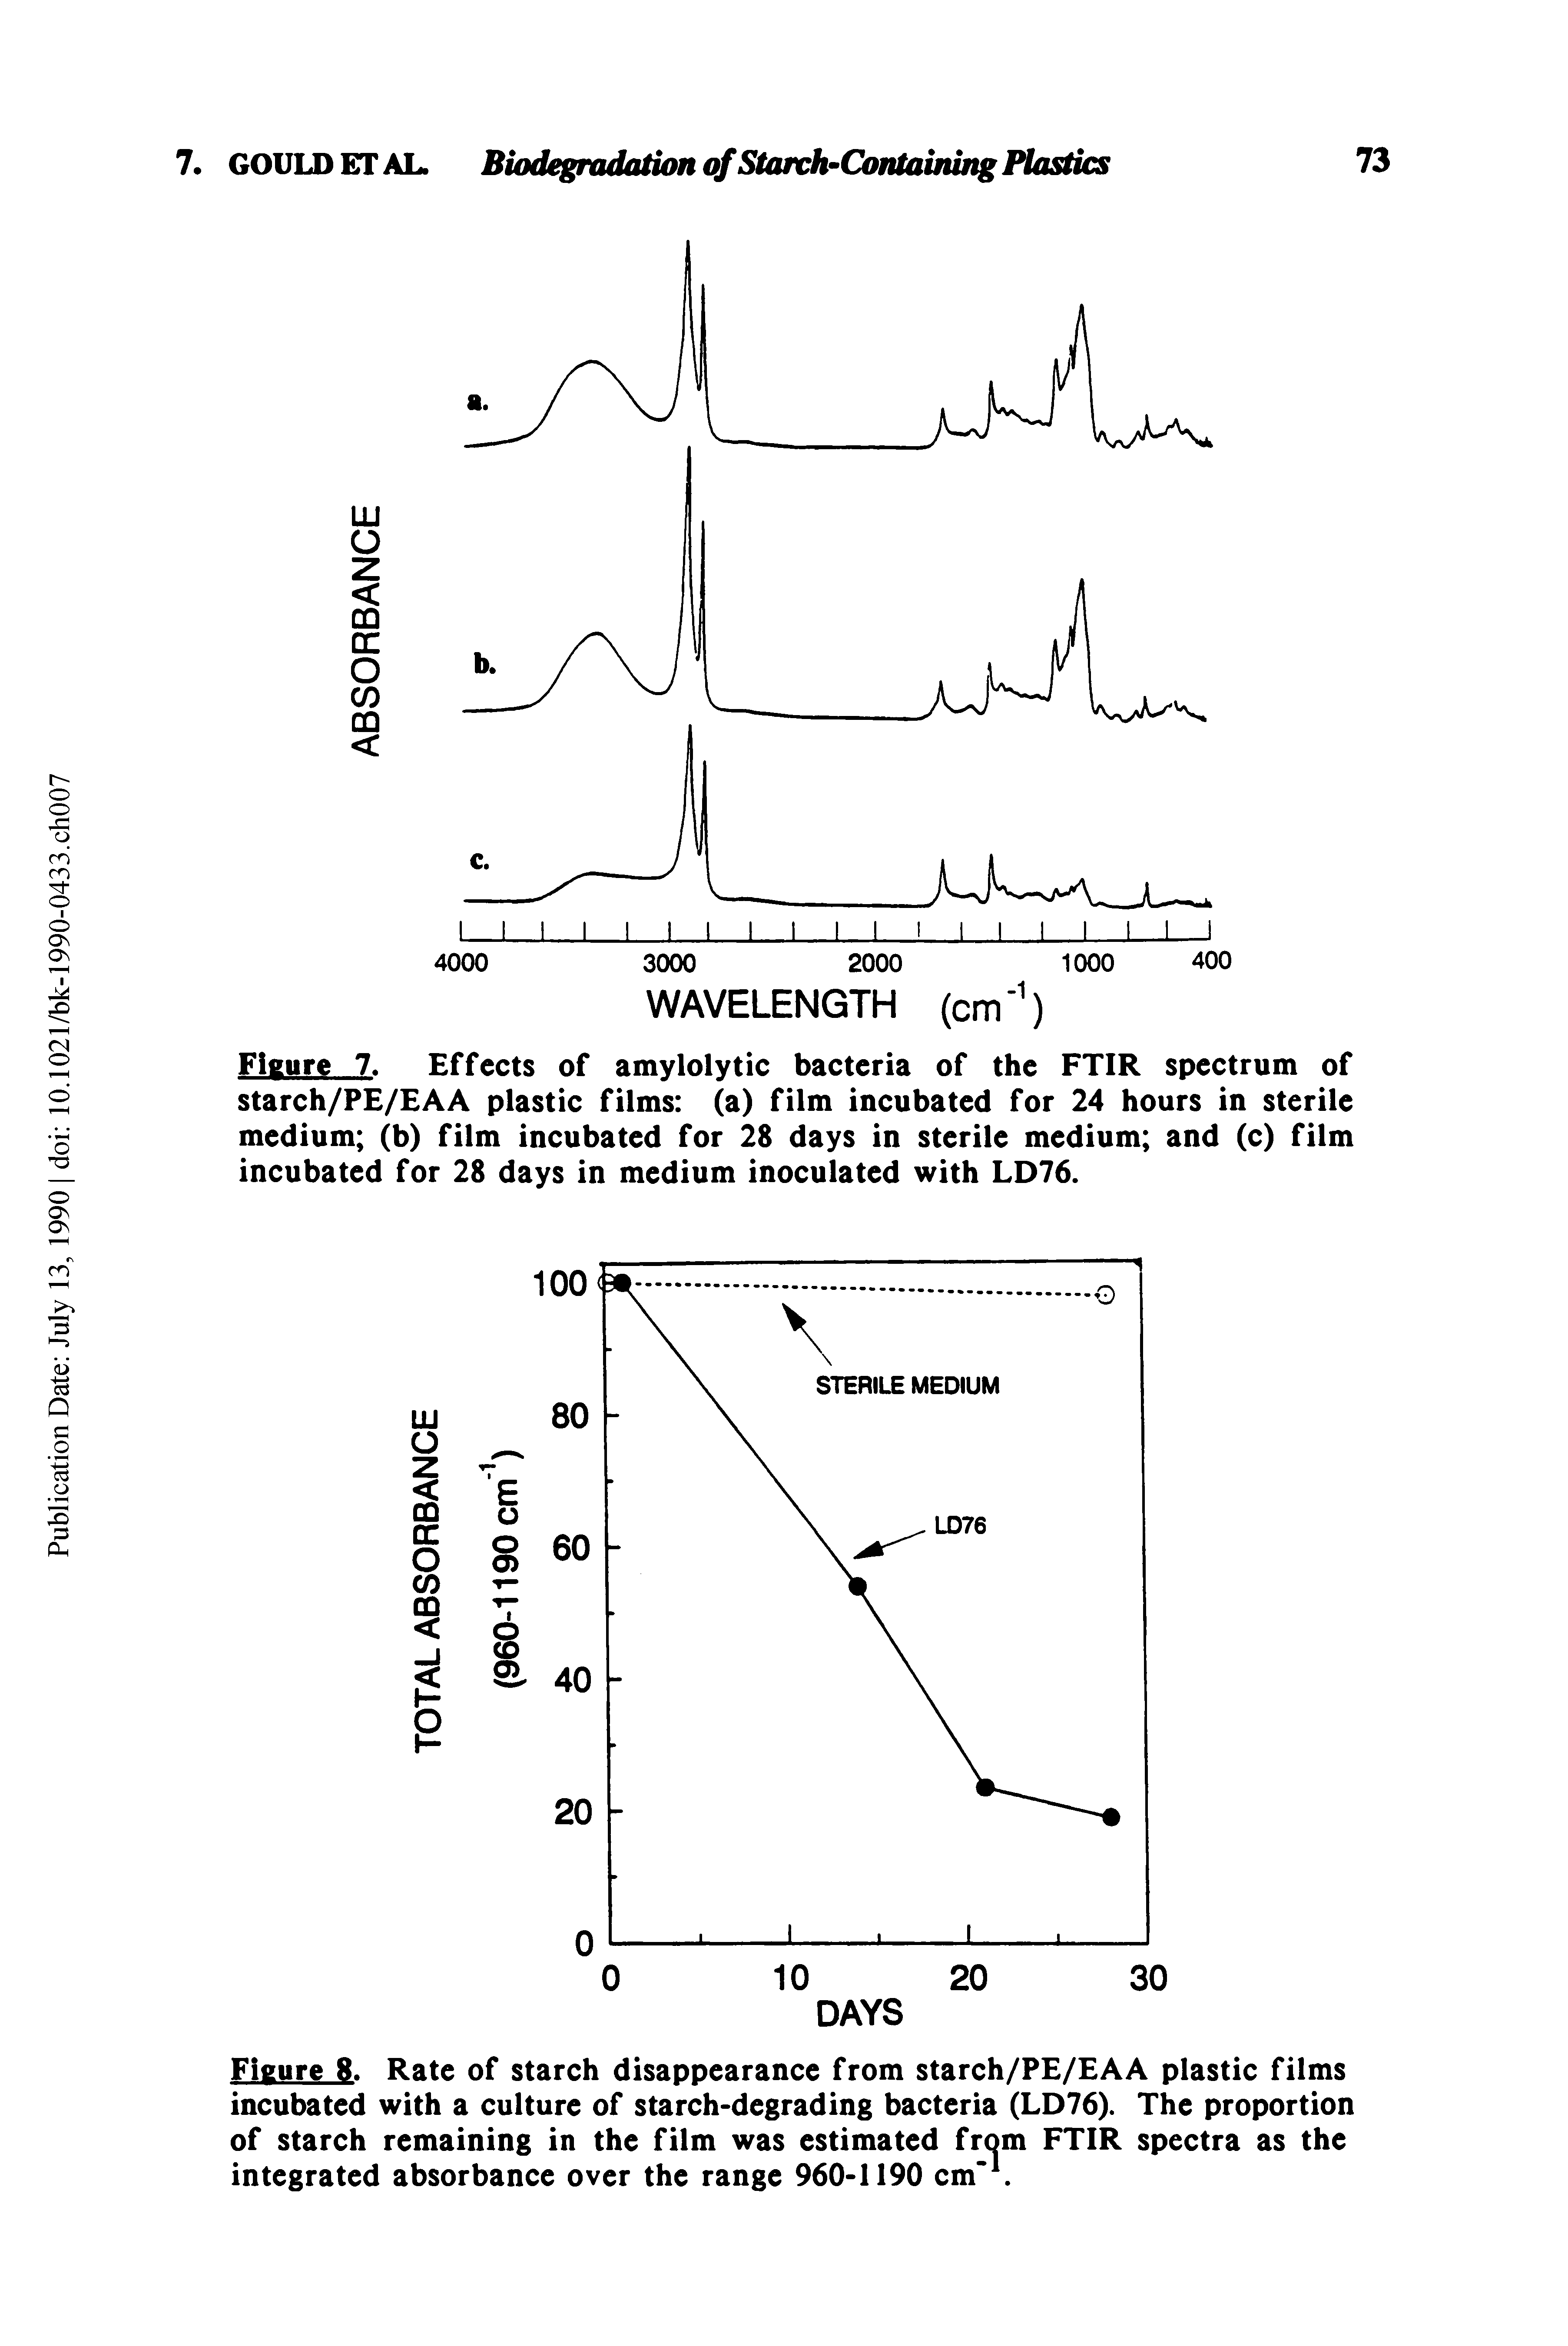 Figure 7. Effects of amylolytic bacteria of the FTIR spectrum of starch/P / AA plastic films (a) film incubated for 24 hours in sterile medium (b) film incubated for 28 days in sterile medium and (c) film incubated for 28 days in medium inoculated with LD76.